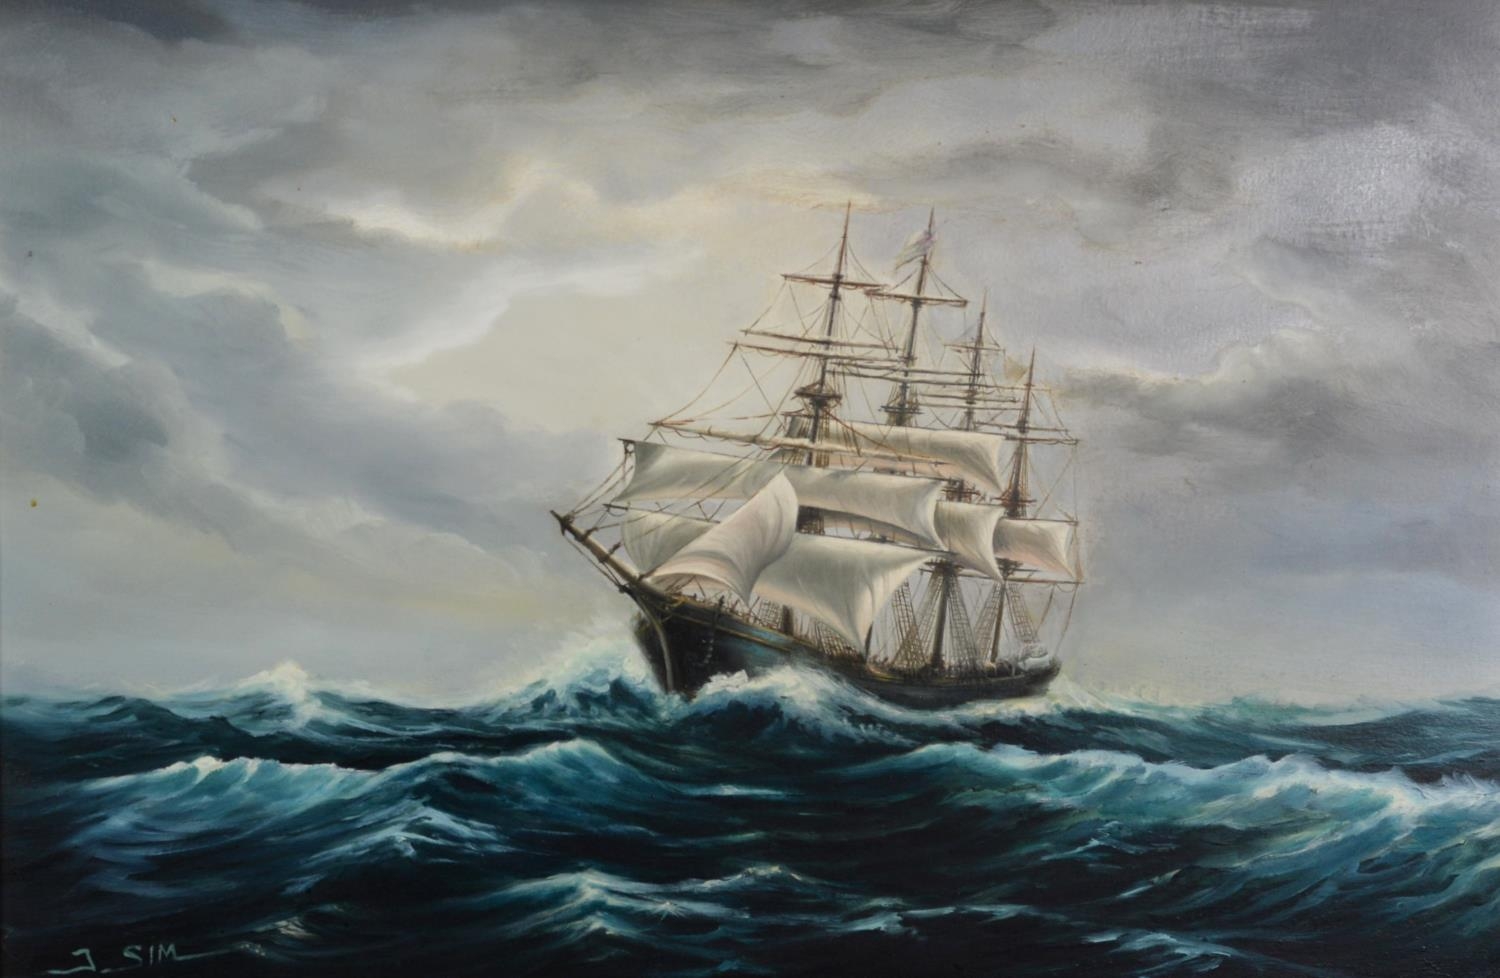 J SIM (TWENTIETH CENTURY) OIL ON CANVAS Four masted ship under sail on rough water Signed 19 ¾” x 29